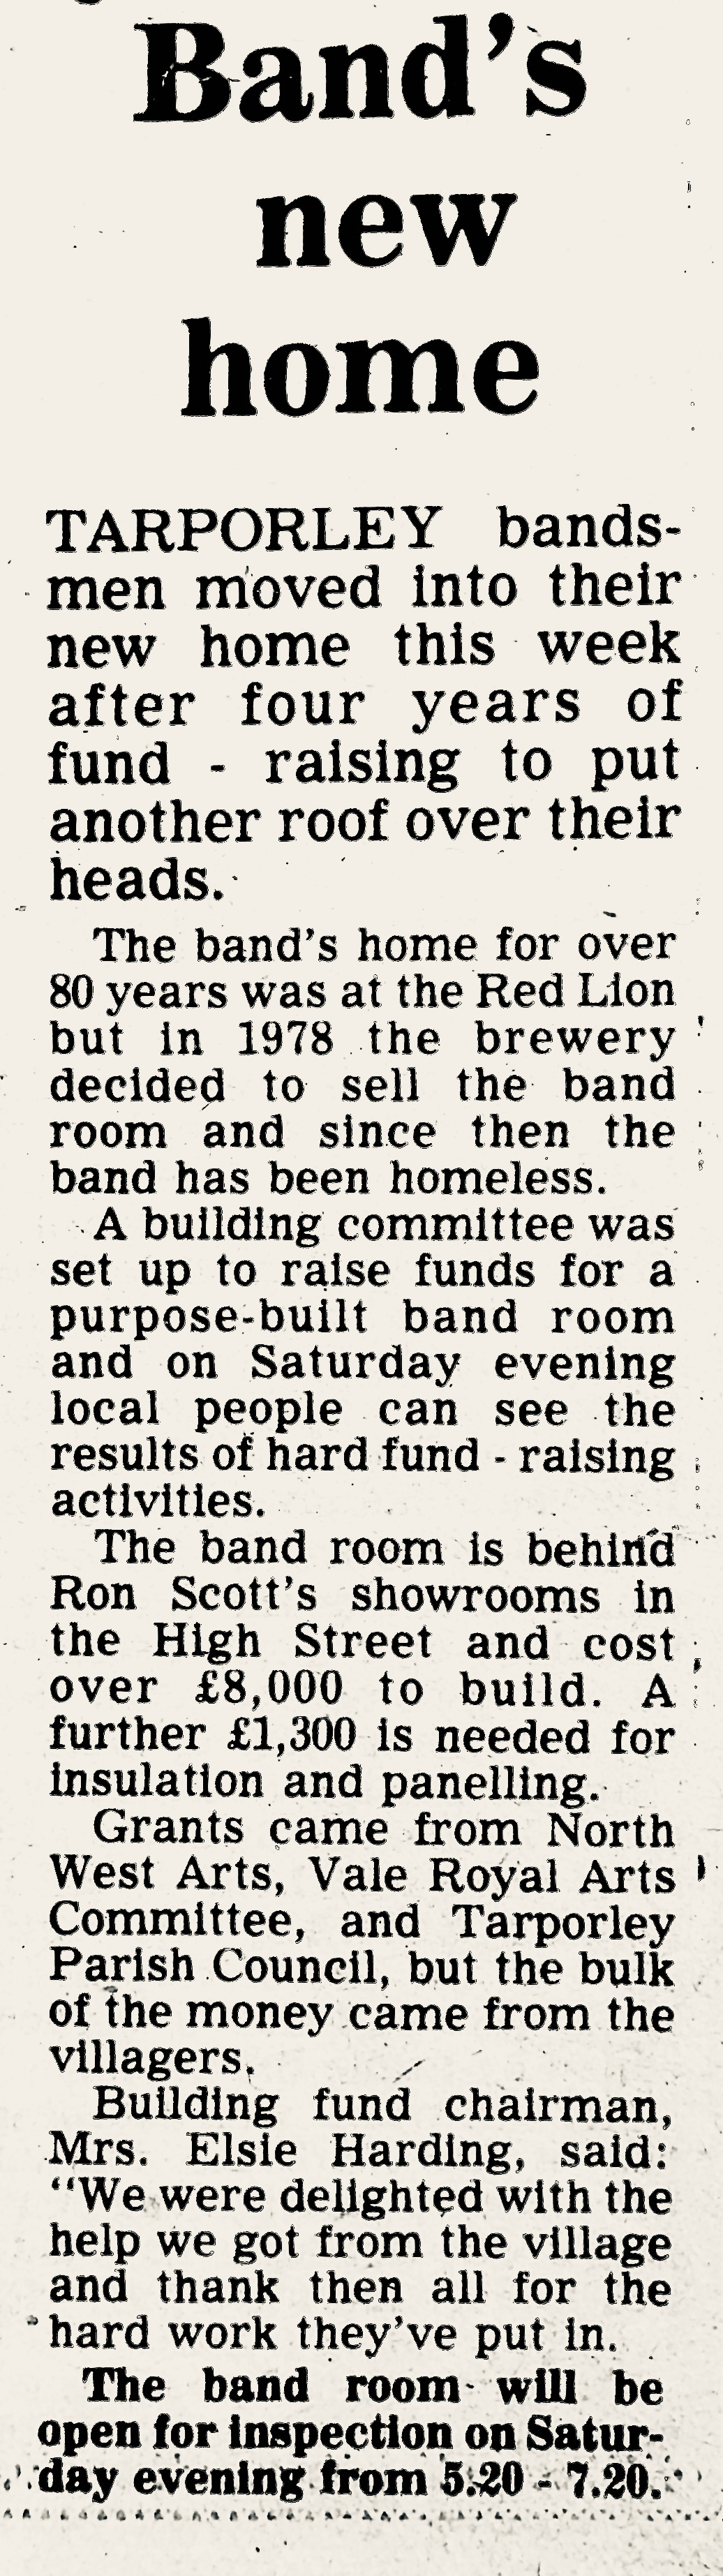 The Chester Observer article about the new band hall 19822.